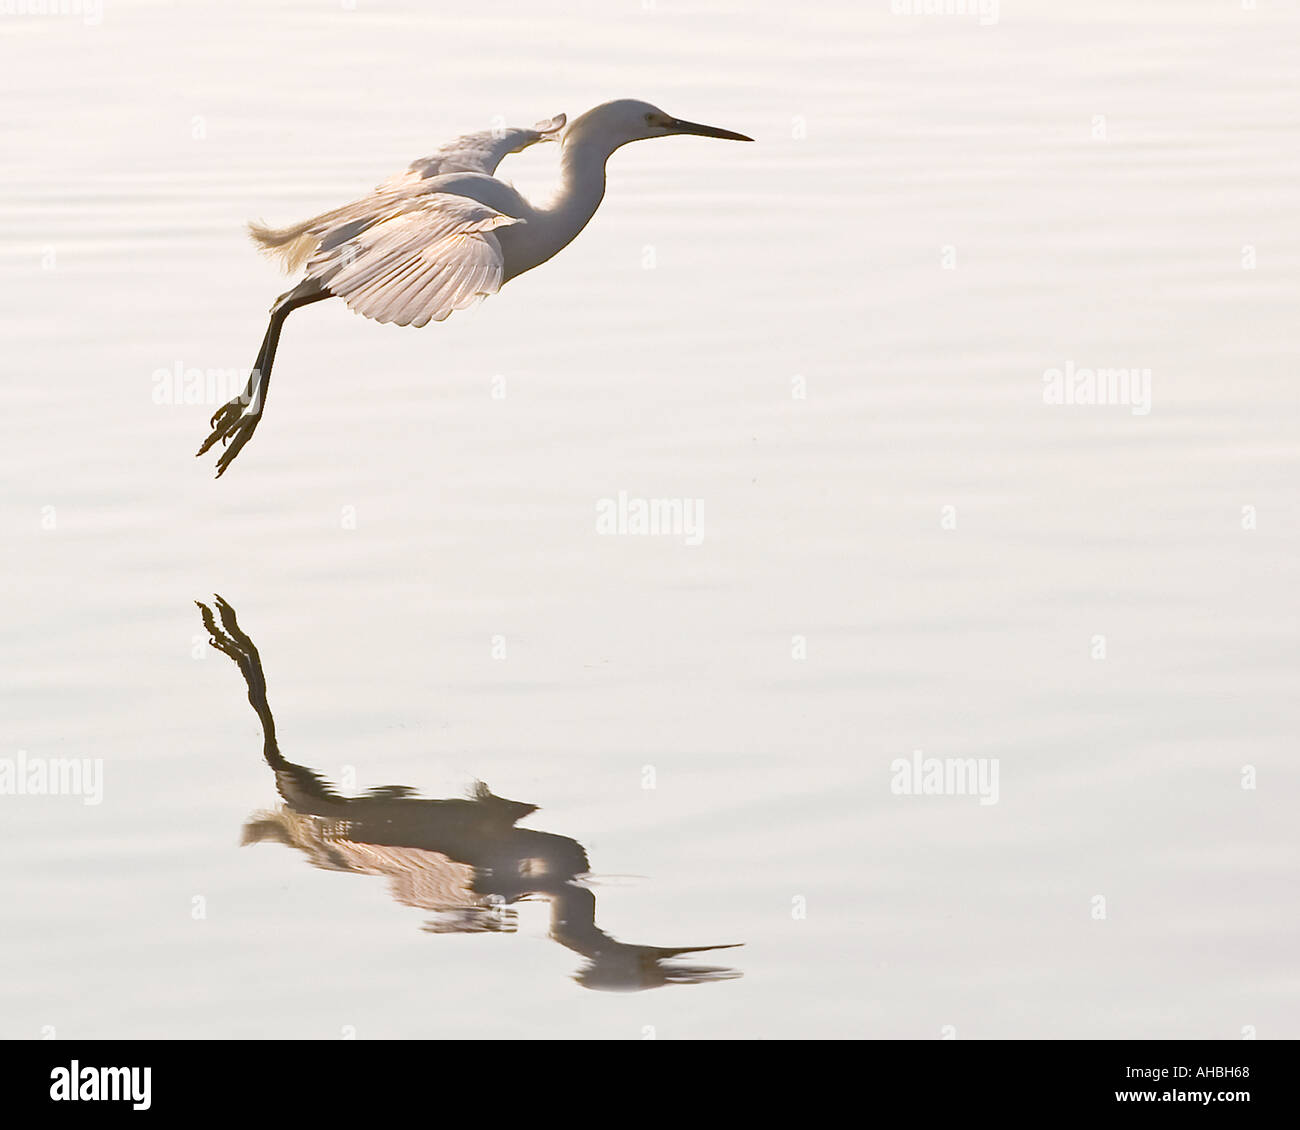 A flying Egret reflects of the water at dusk Stock Photo